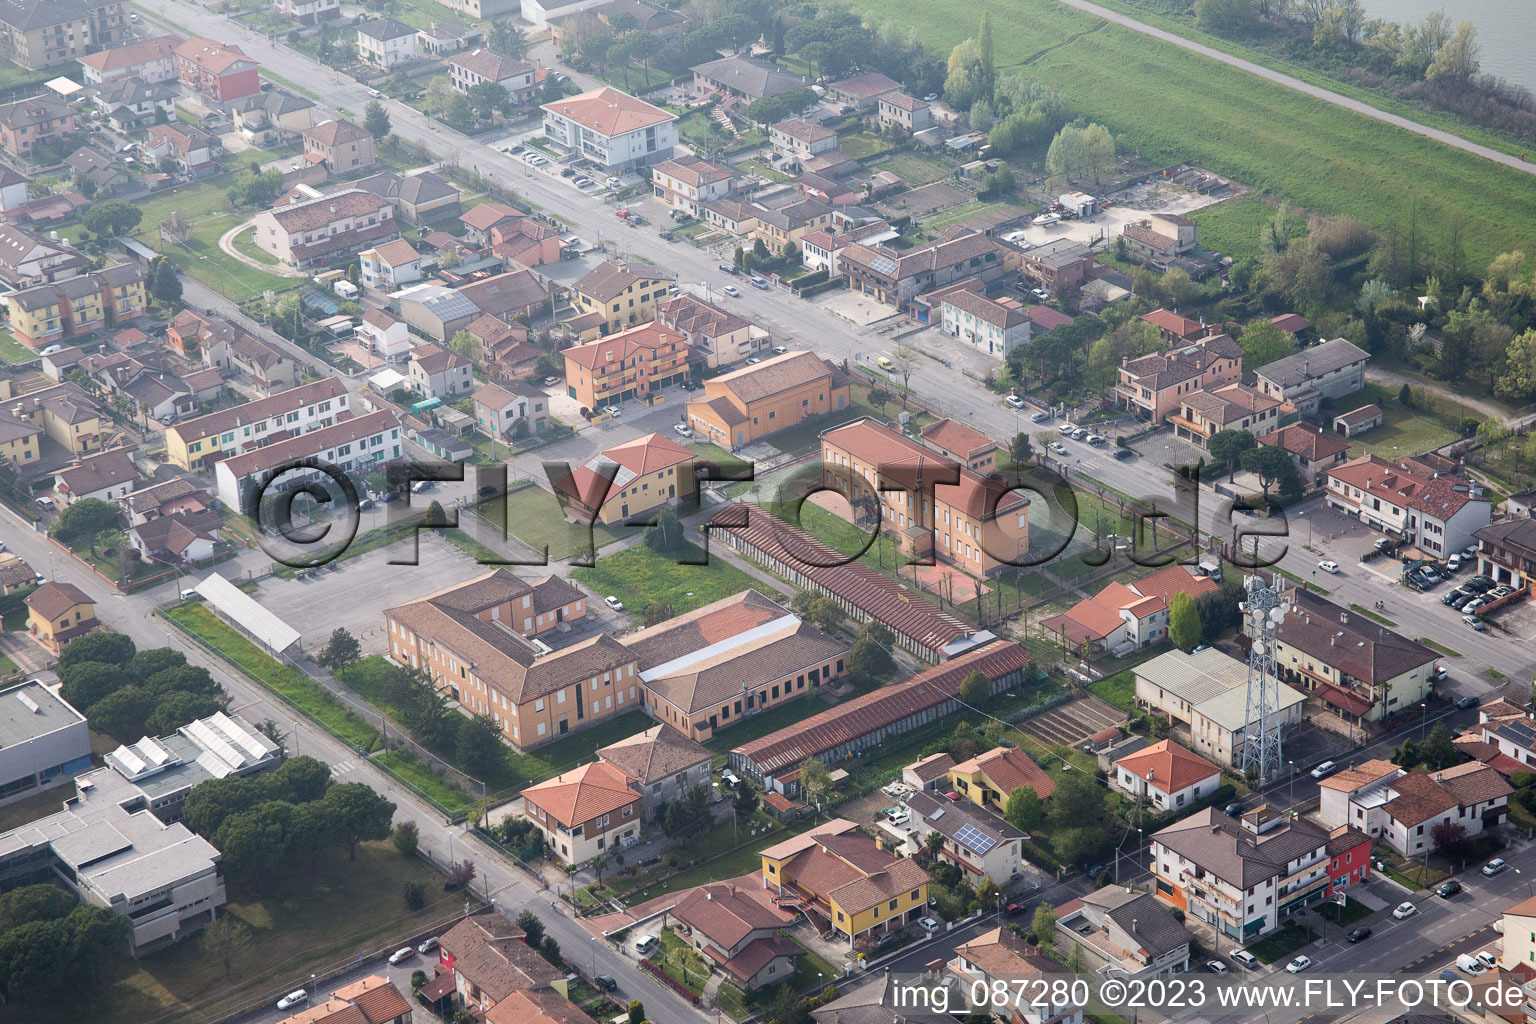 Ca' Tiepolo in the state Veneto, Italy from above